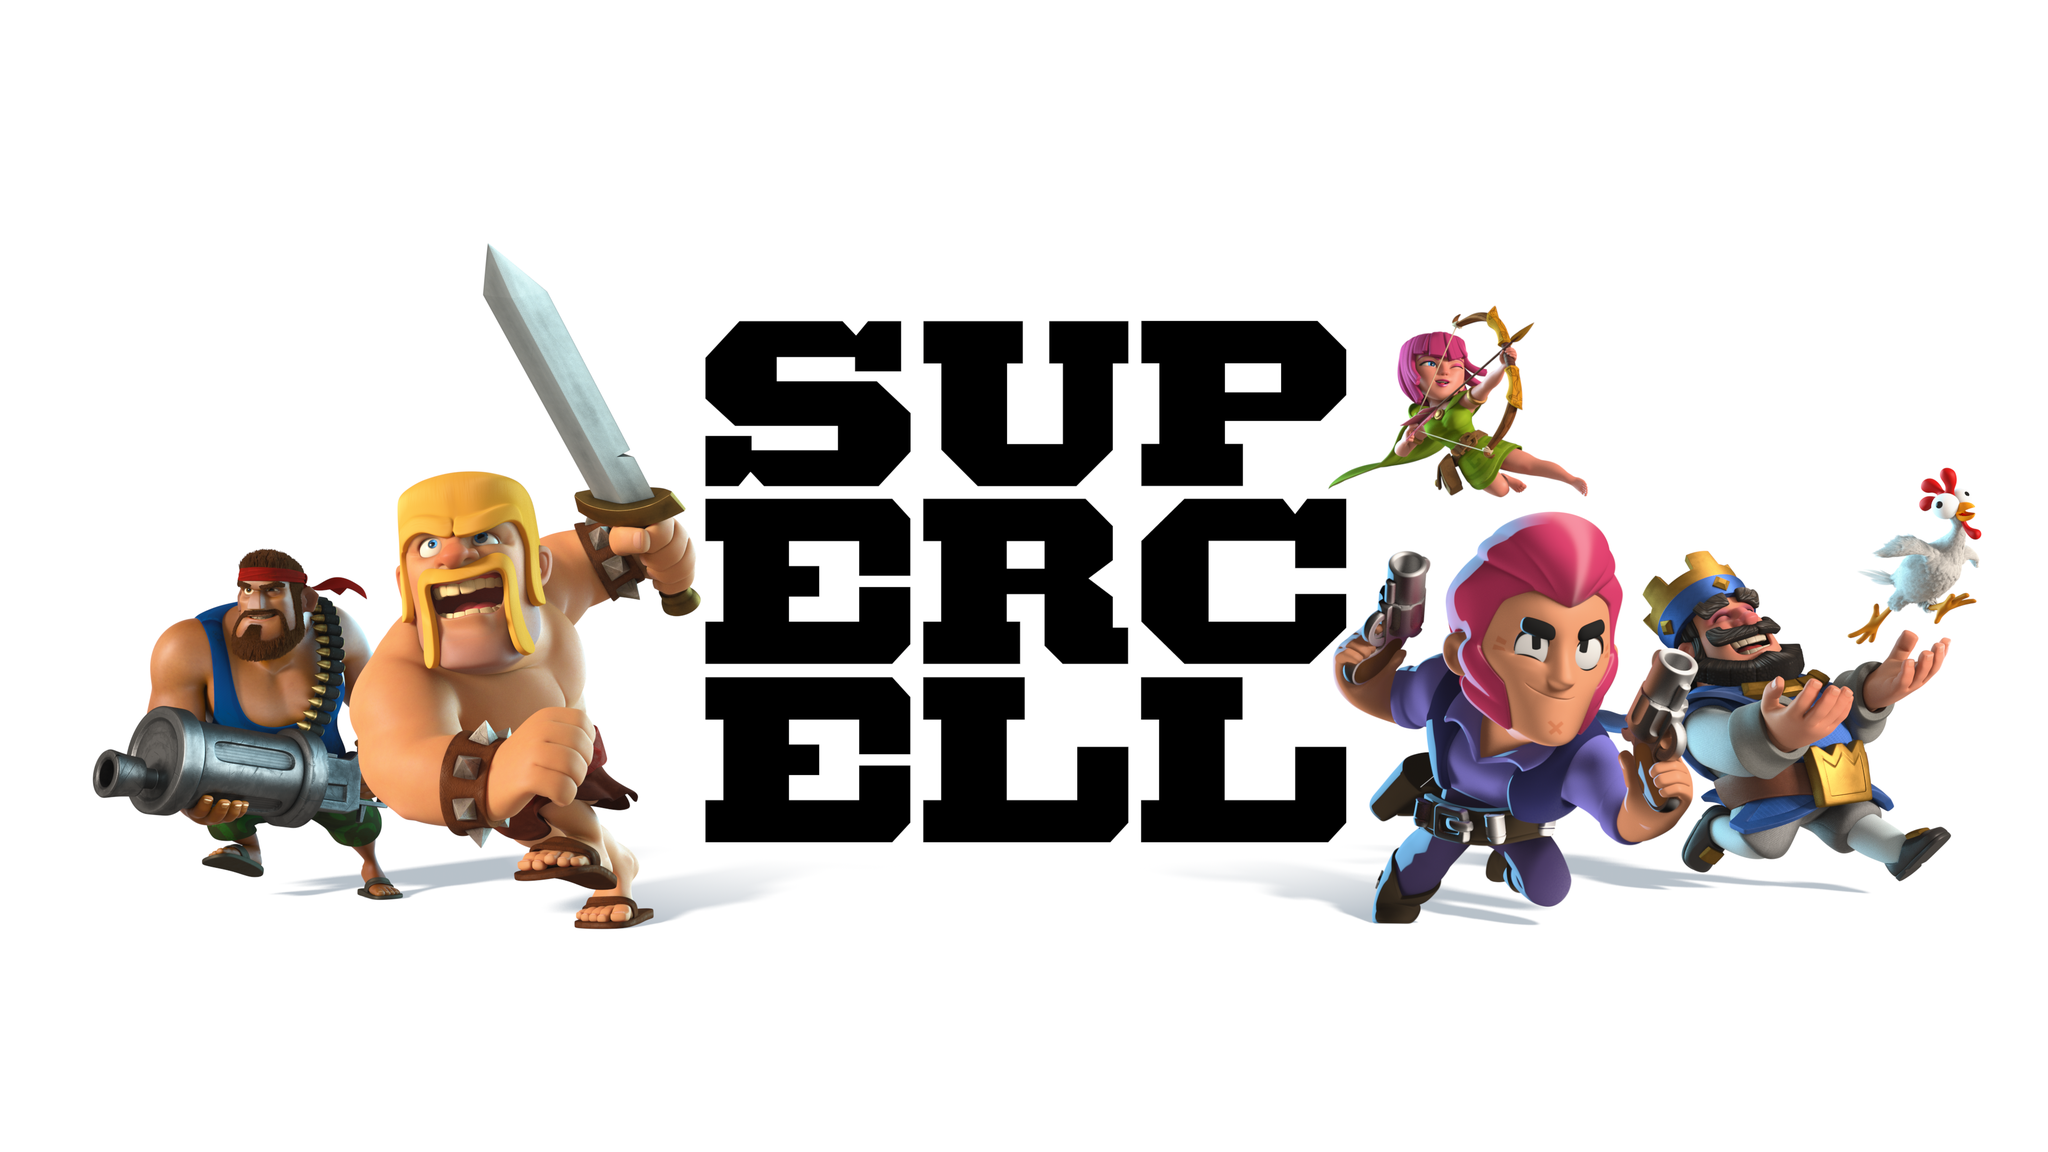 Supercell T Co Ua4oeogdnl We Re Looking For An Experienced Performance Marketing Pro To Help Our Investment Companies Grow T Co F8zwd2bt0s